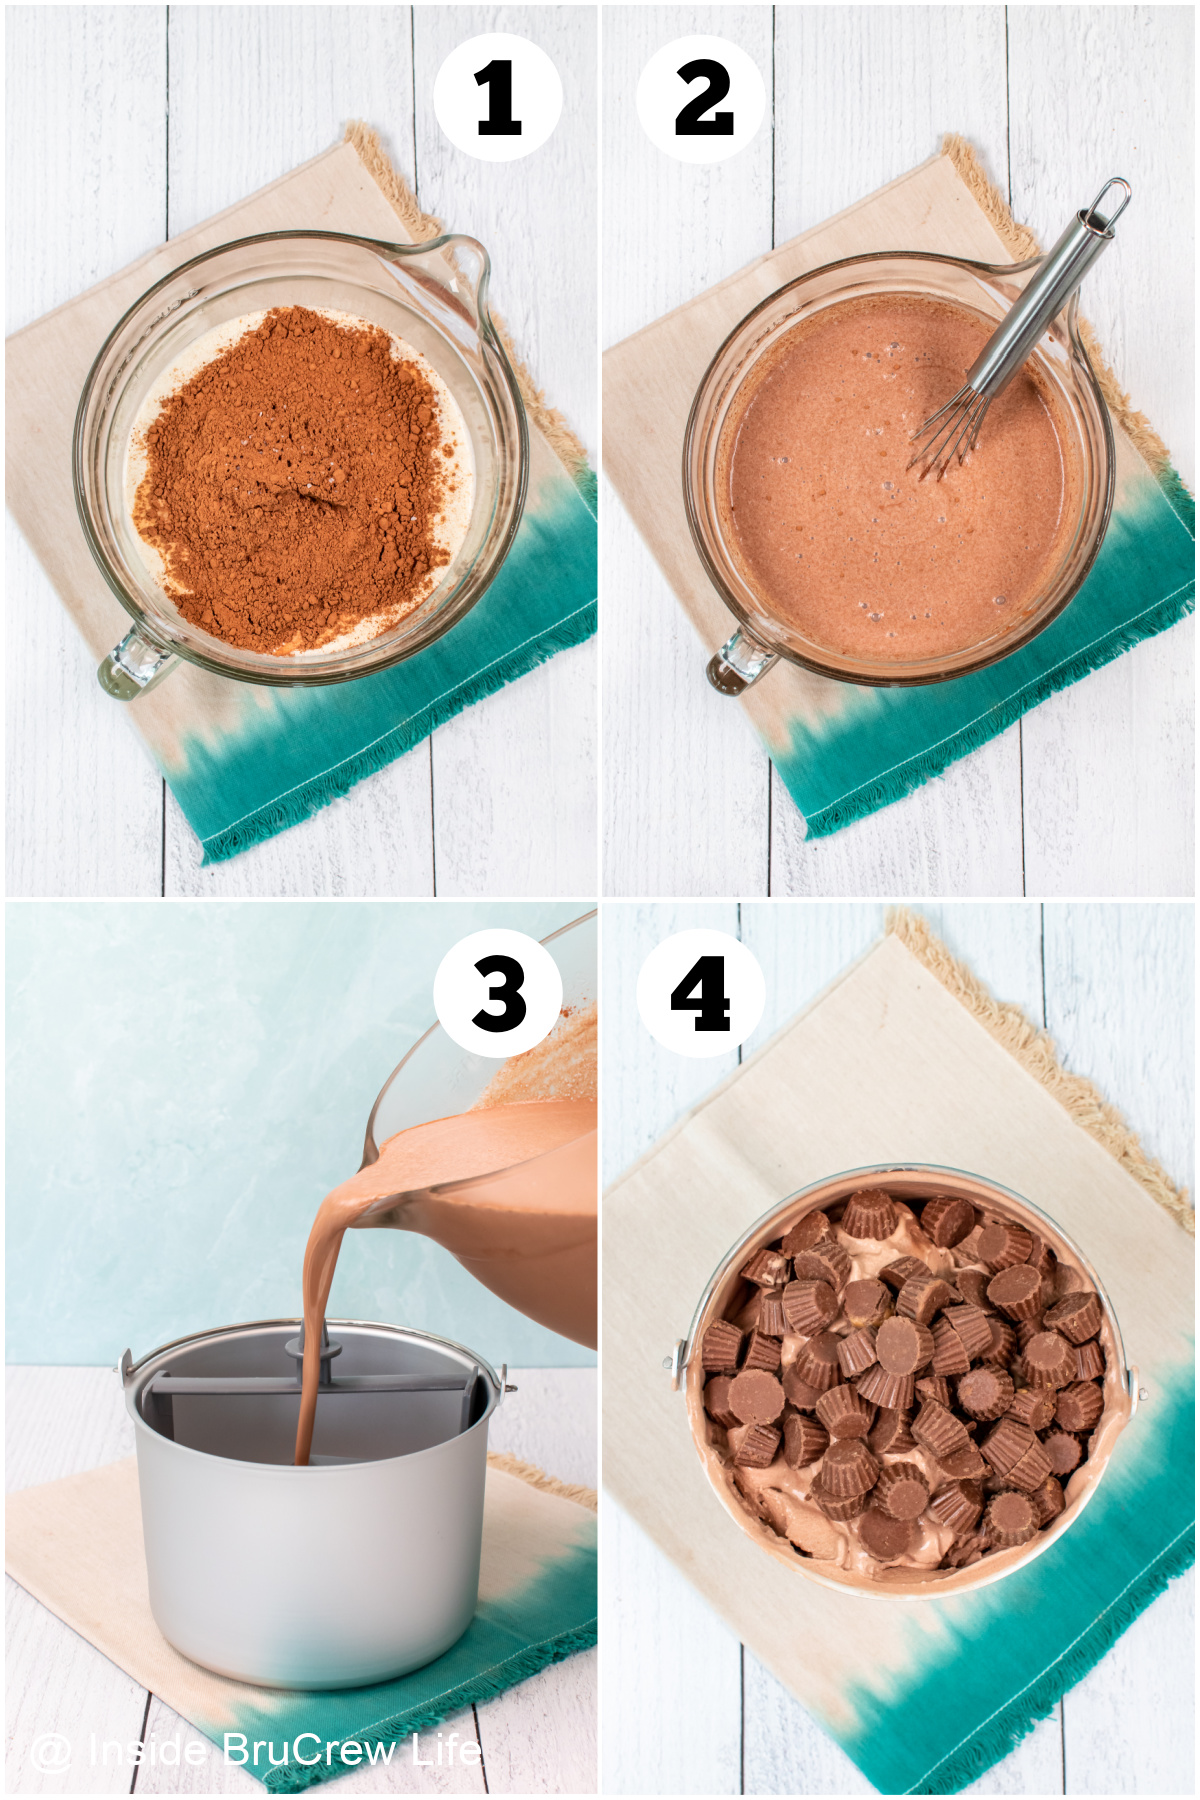 Four pictures collaged together showing how to make homemade chocolate ice cream.